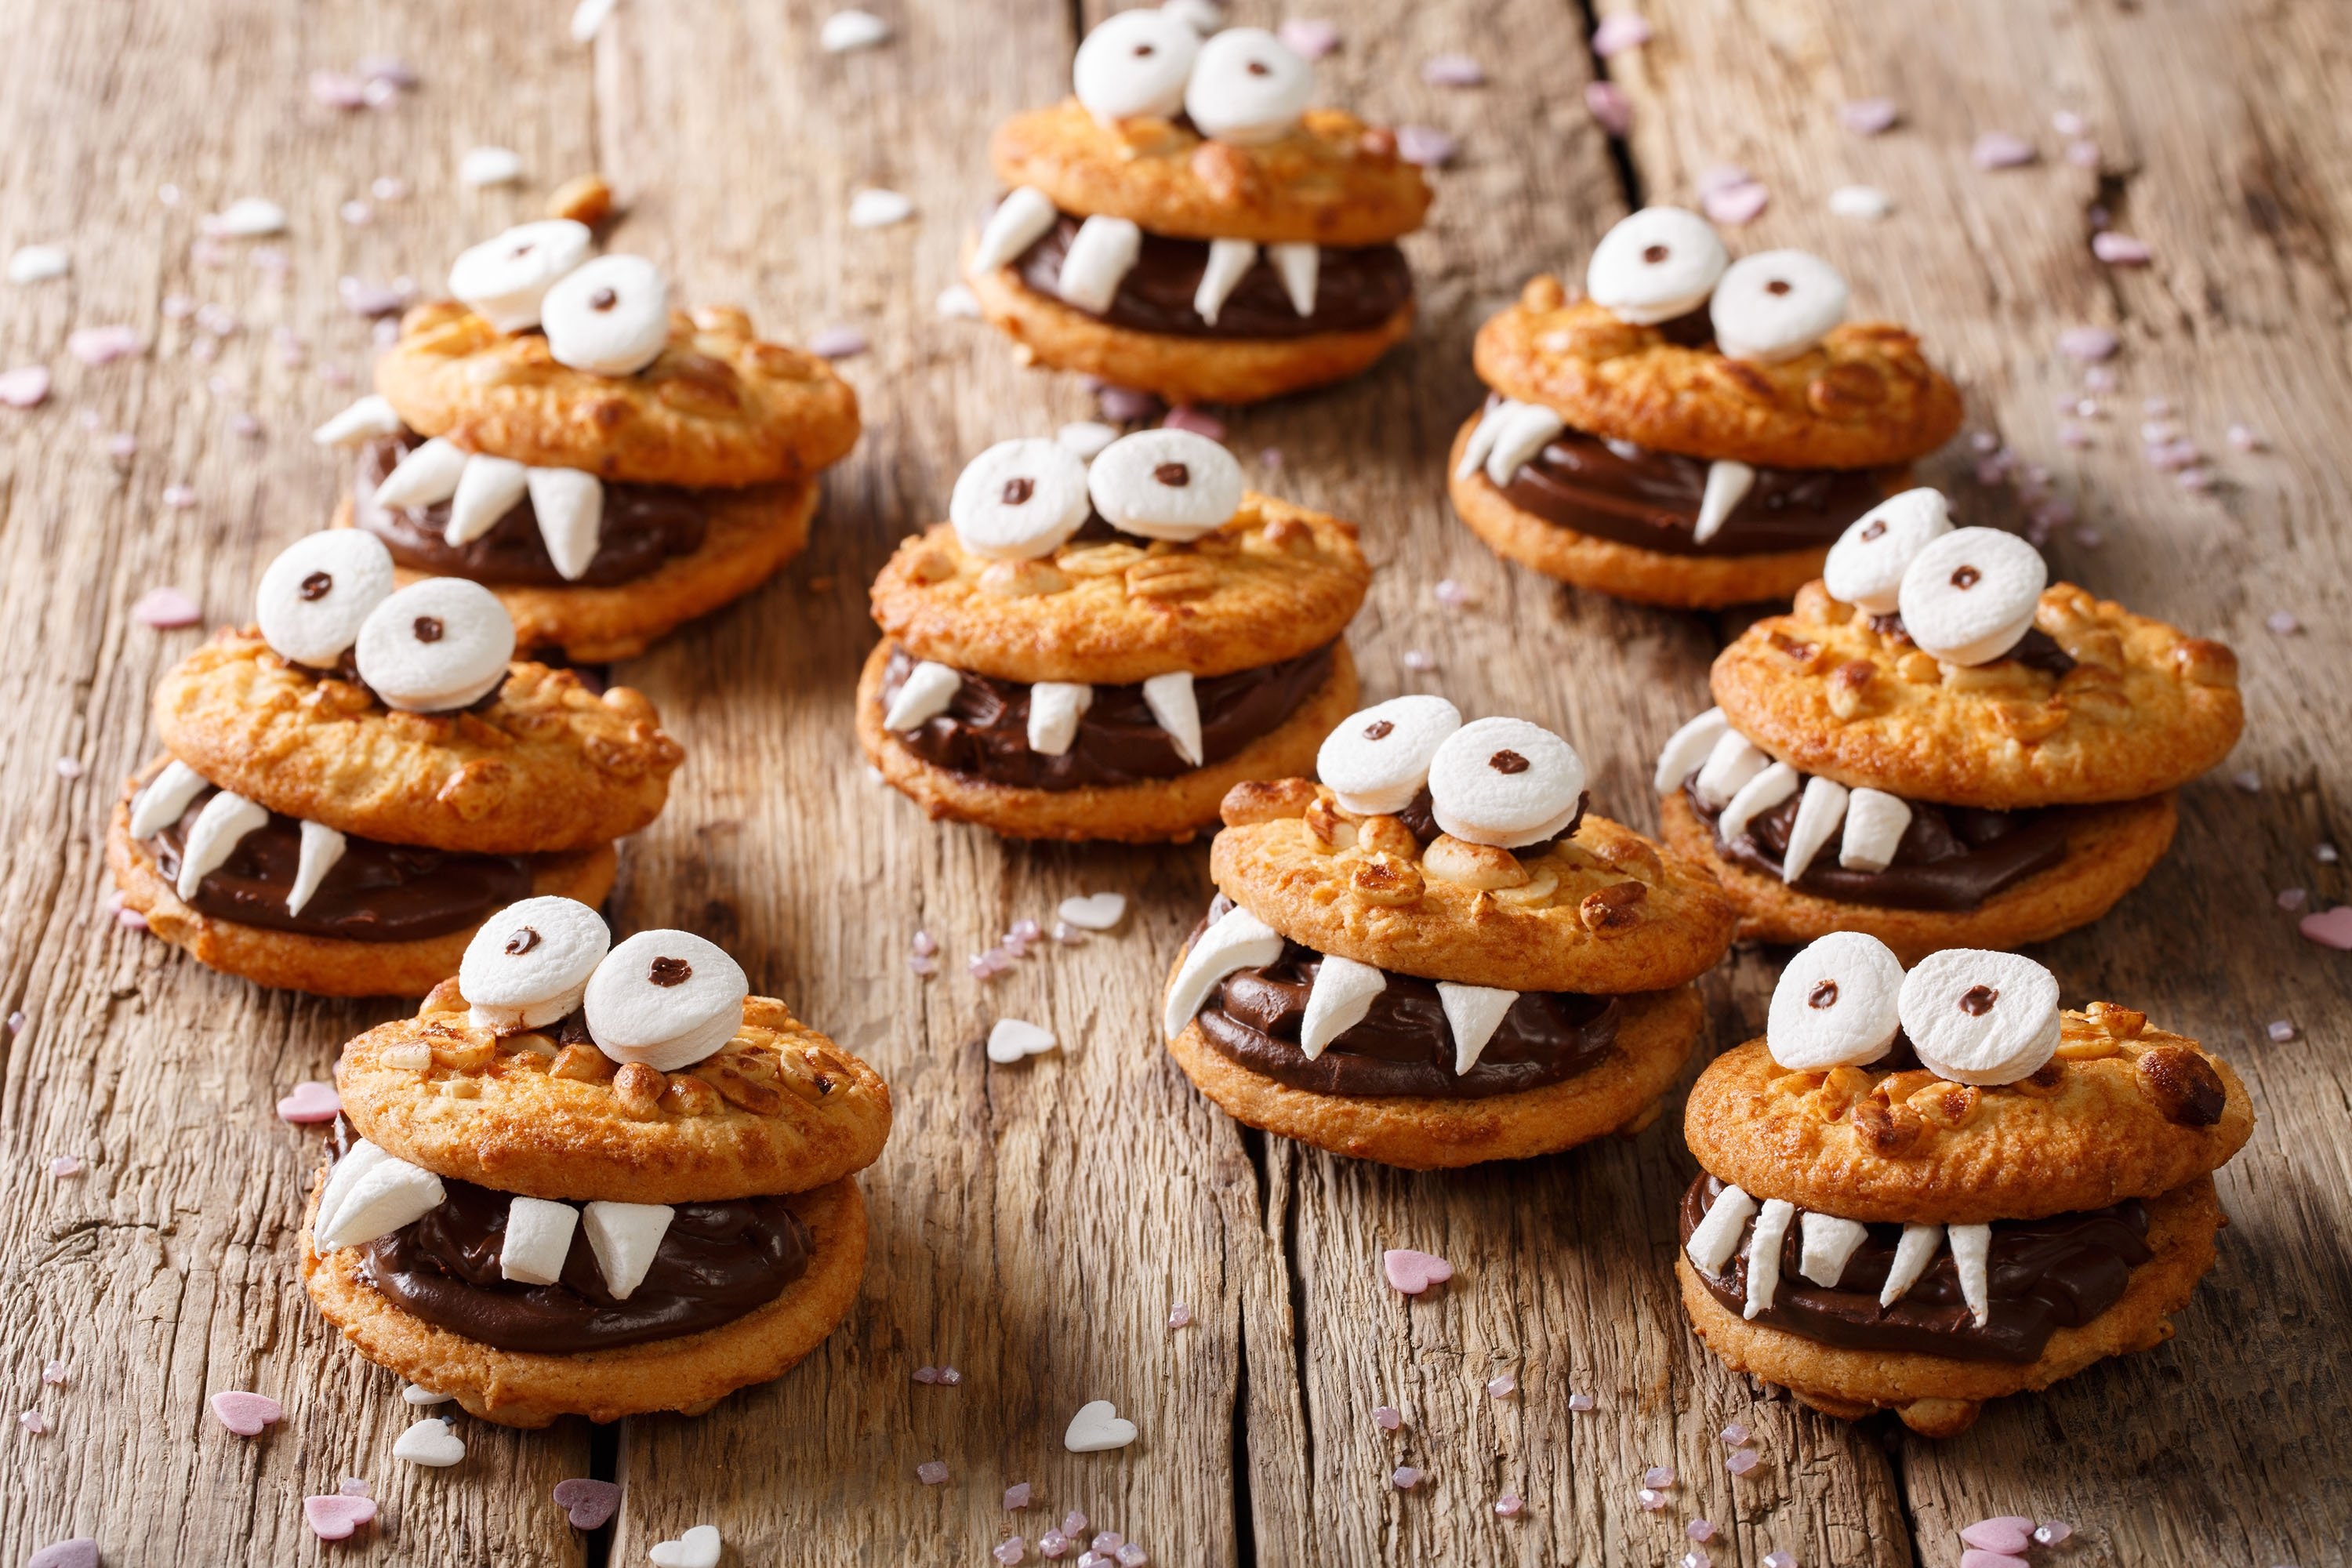 Funny monsters made from chocolate cookies.  (Photo Shutterstock)